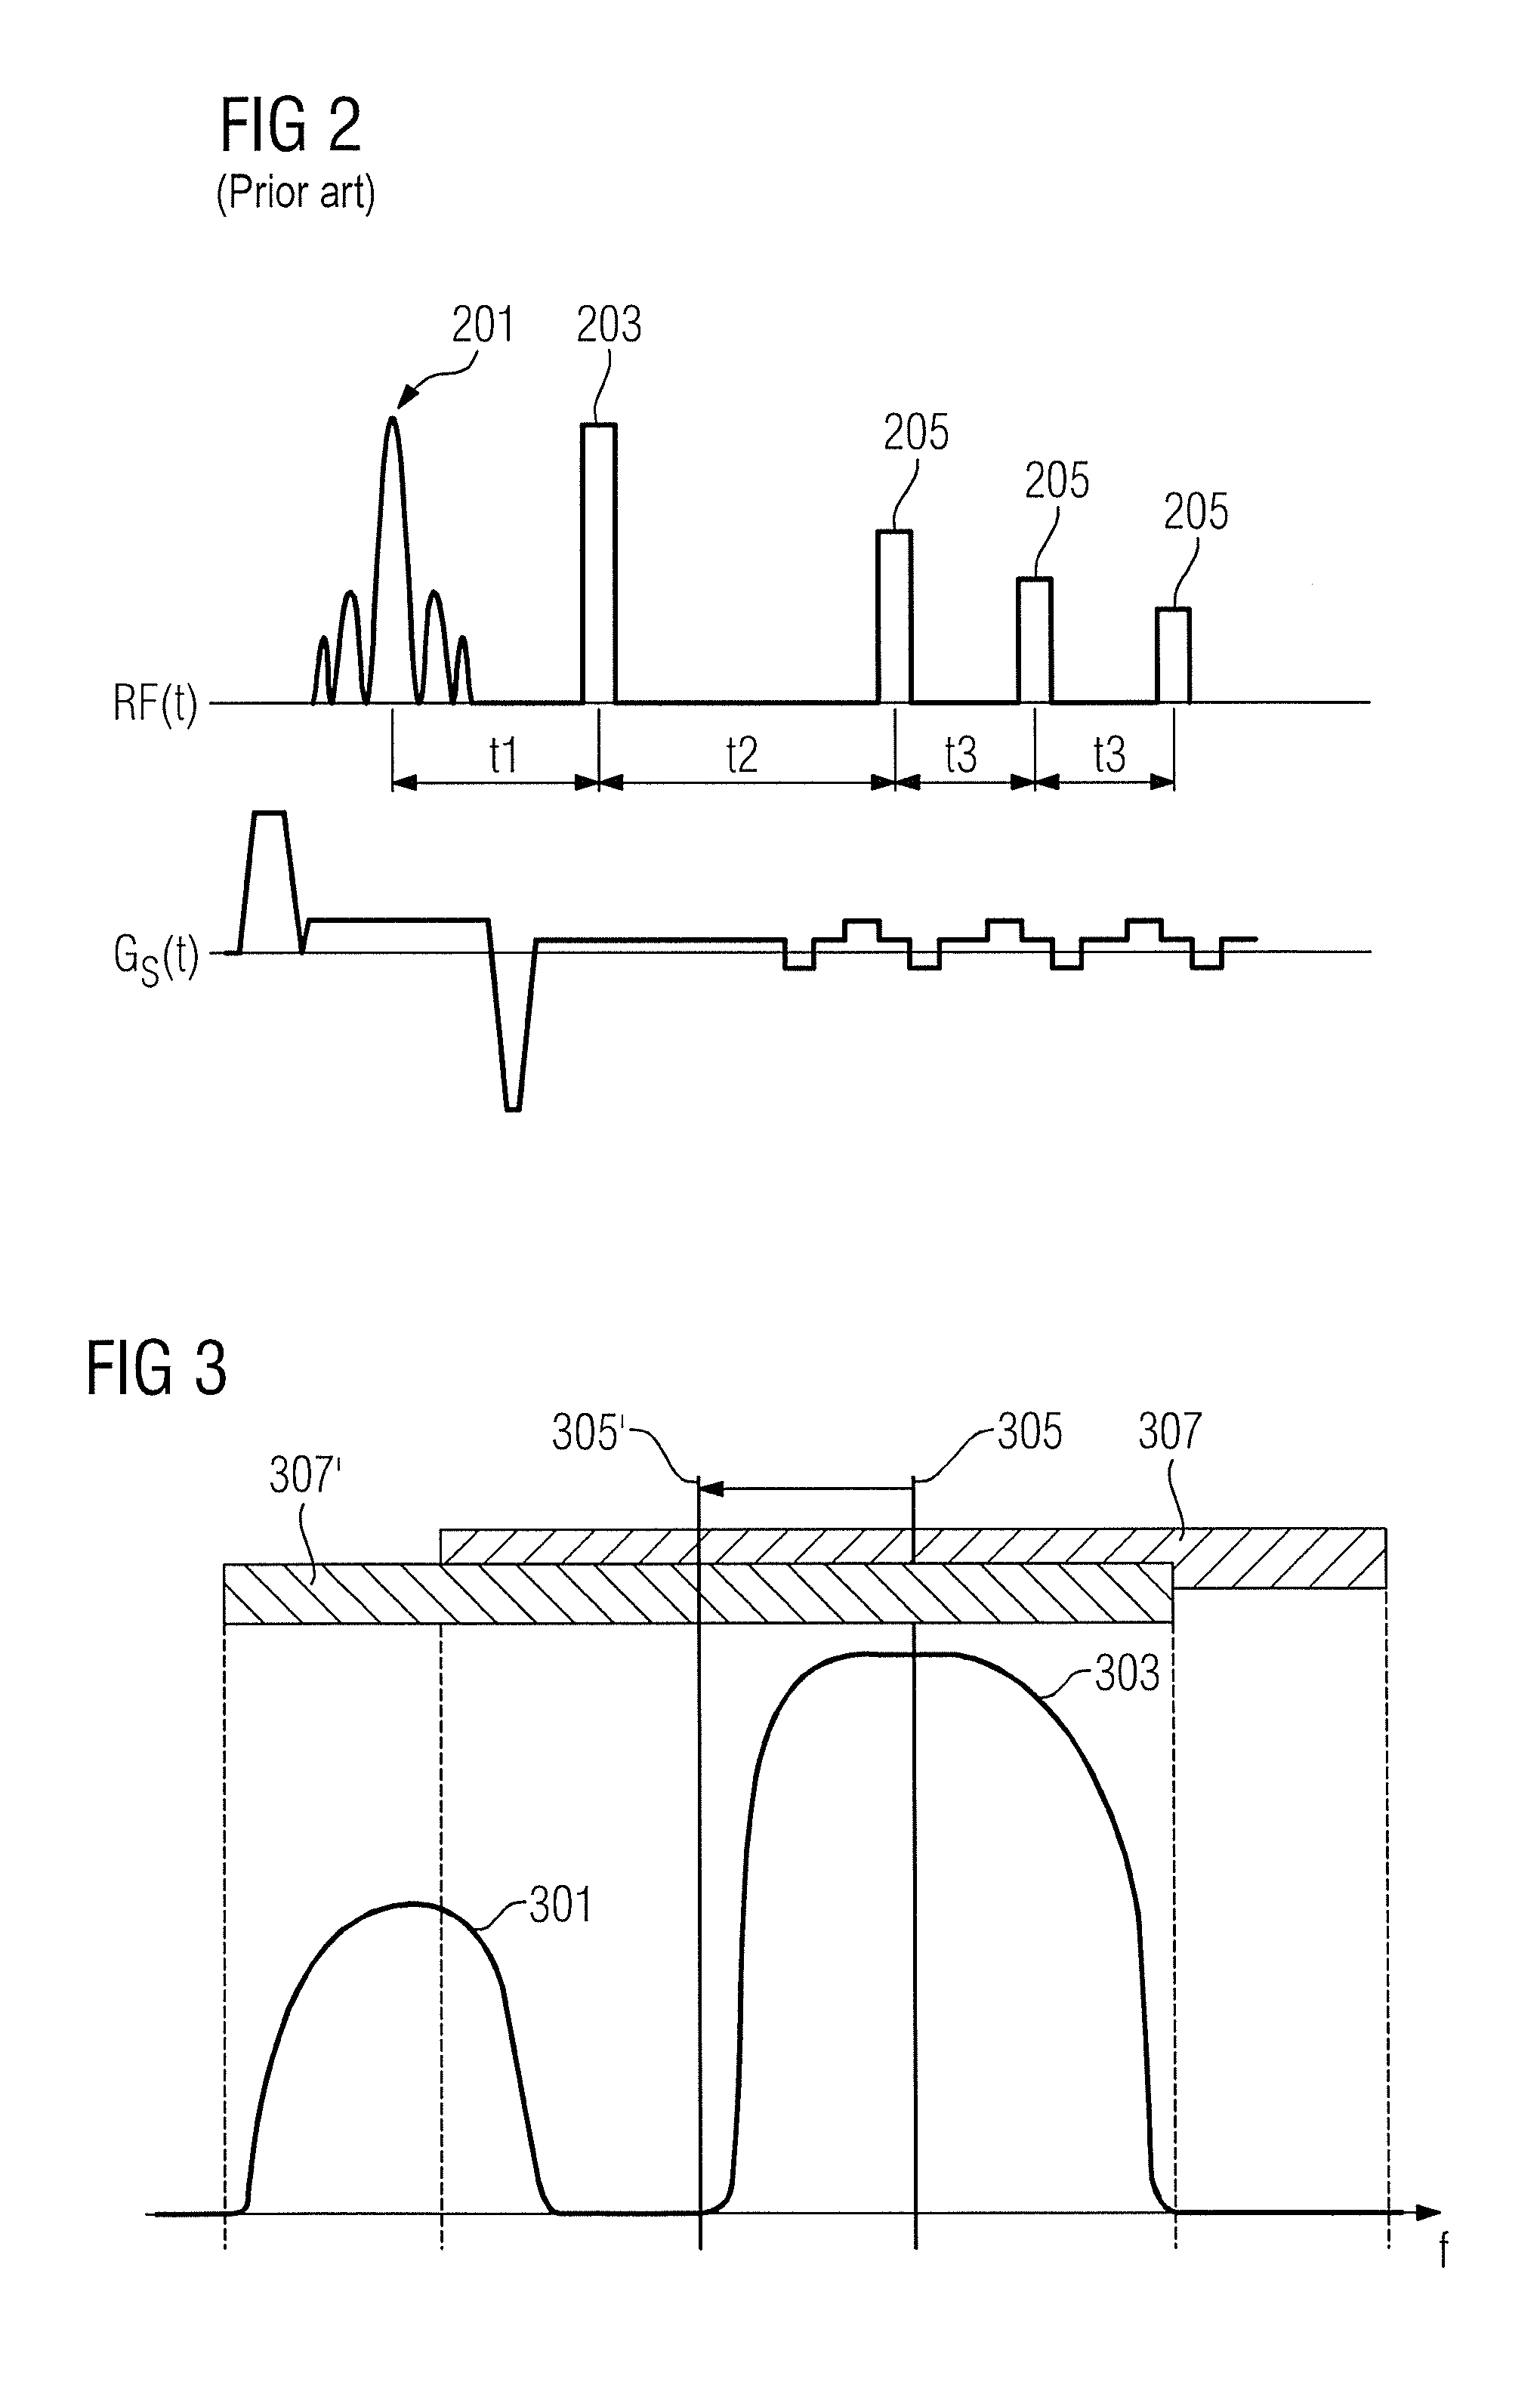 Method and apparatus for acquisition of magnetic resonance data while avoiding signal inhomogeneities